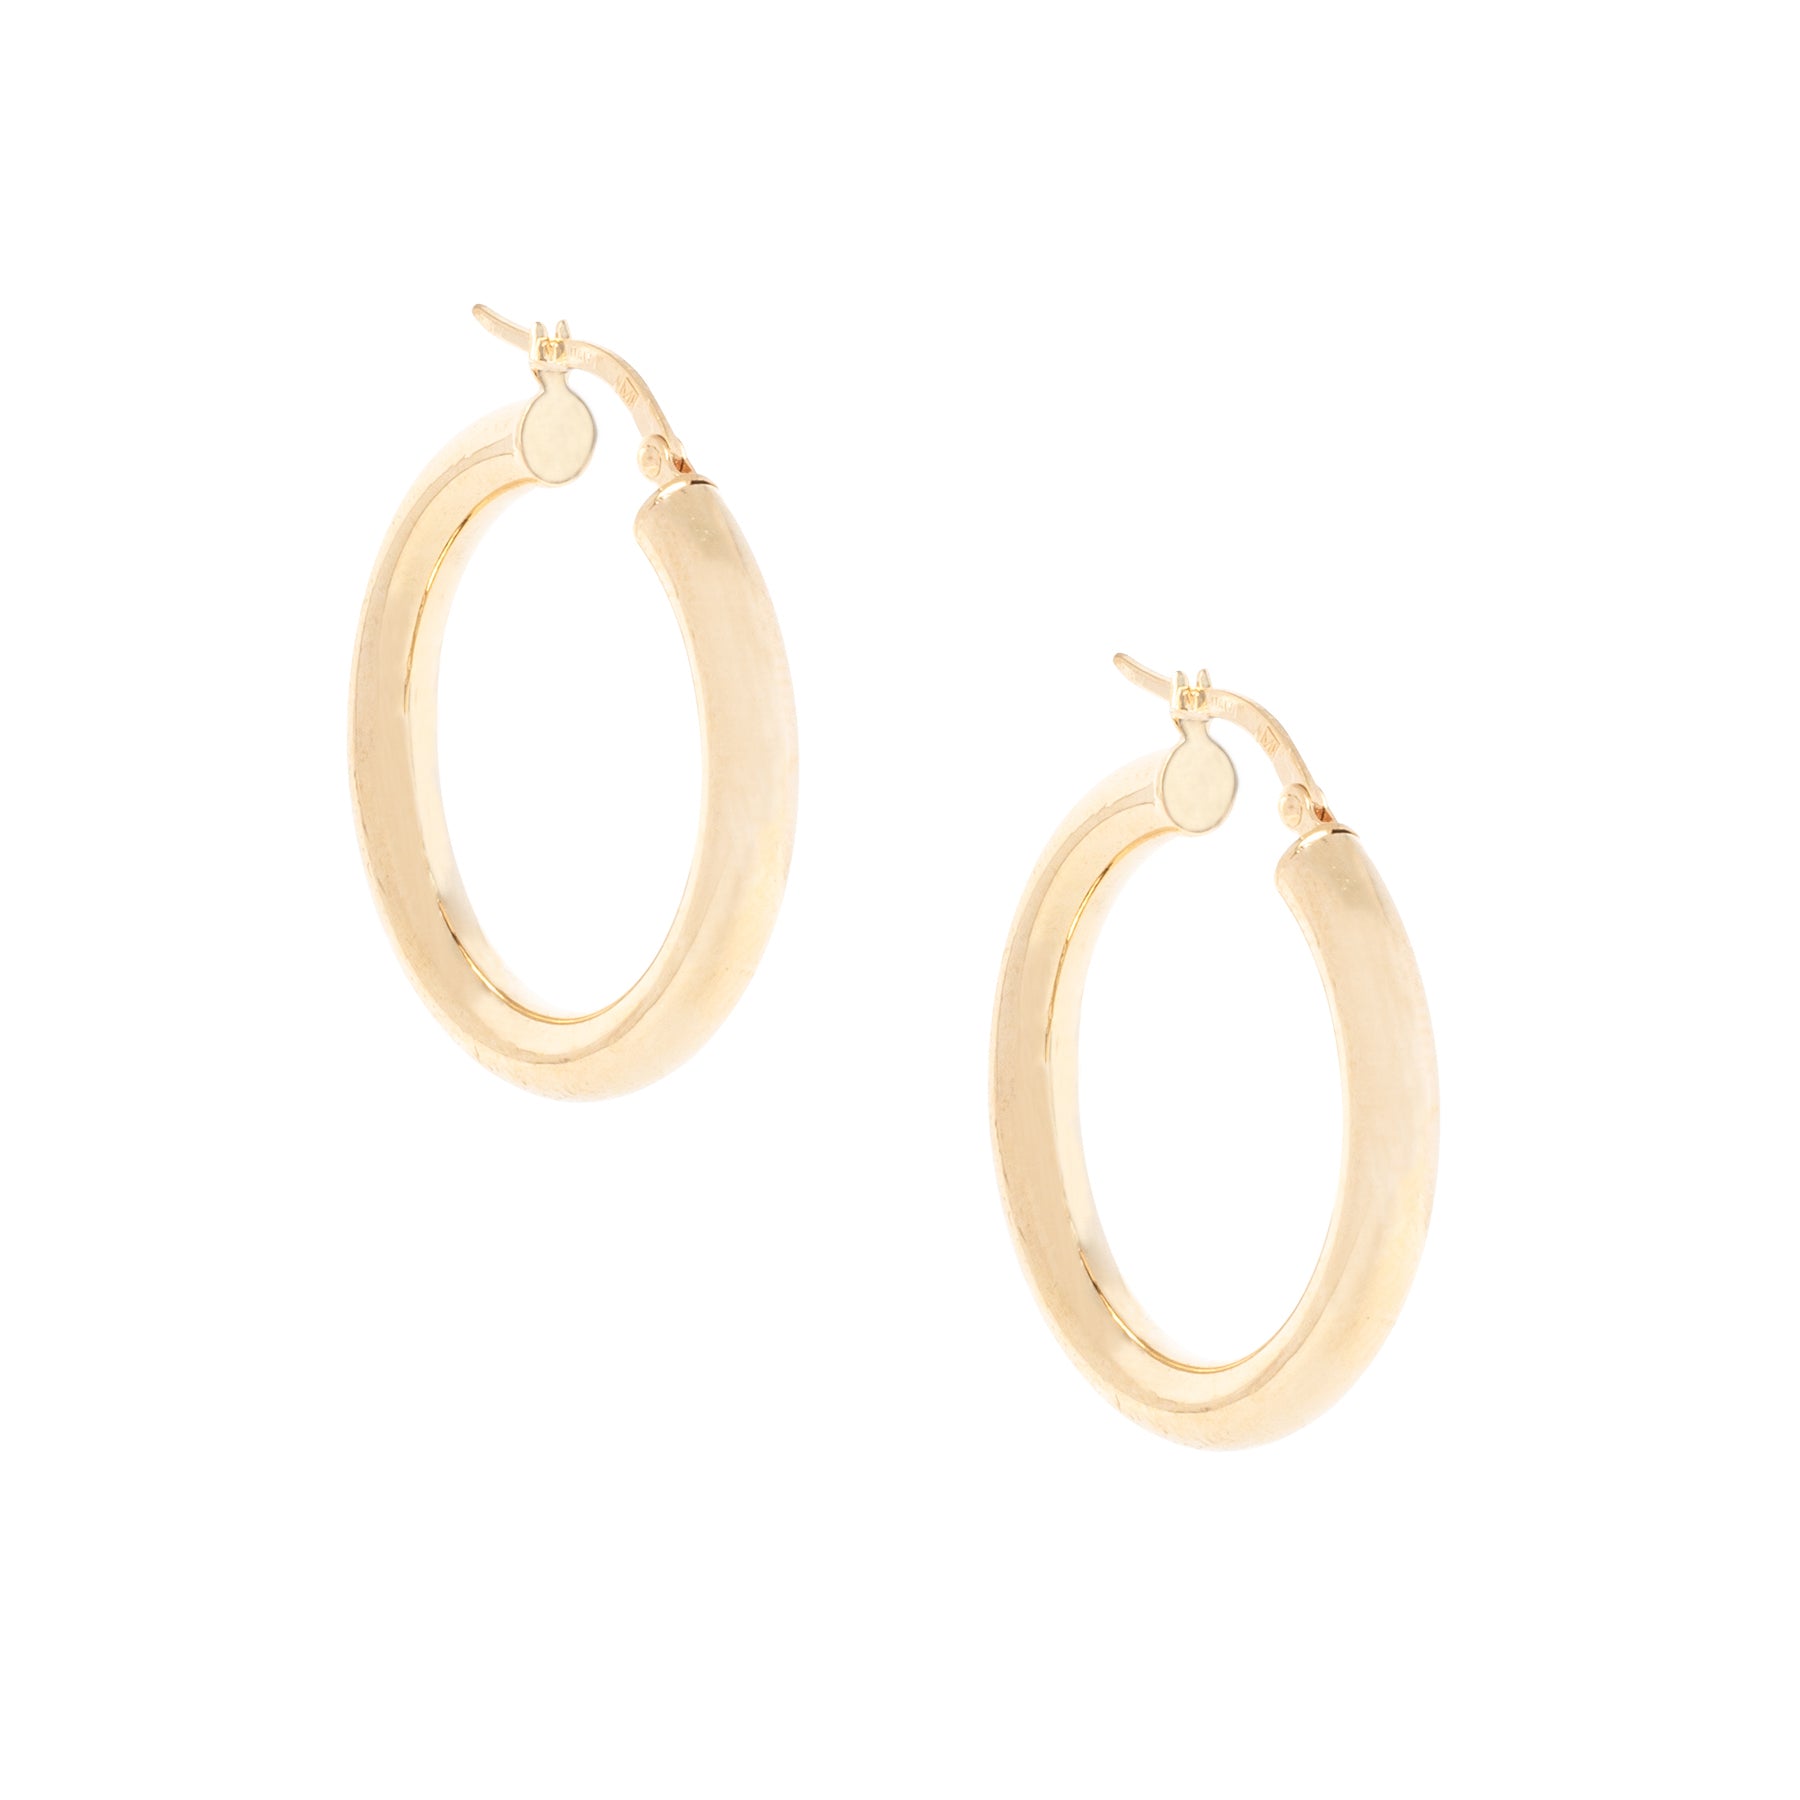 1.5" 4MM Thick Gold Hoops - Nina Segal Jewelry